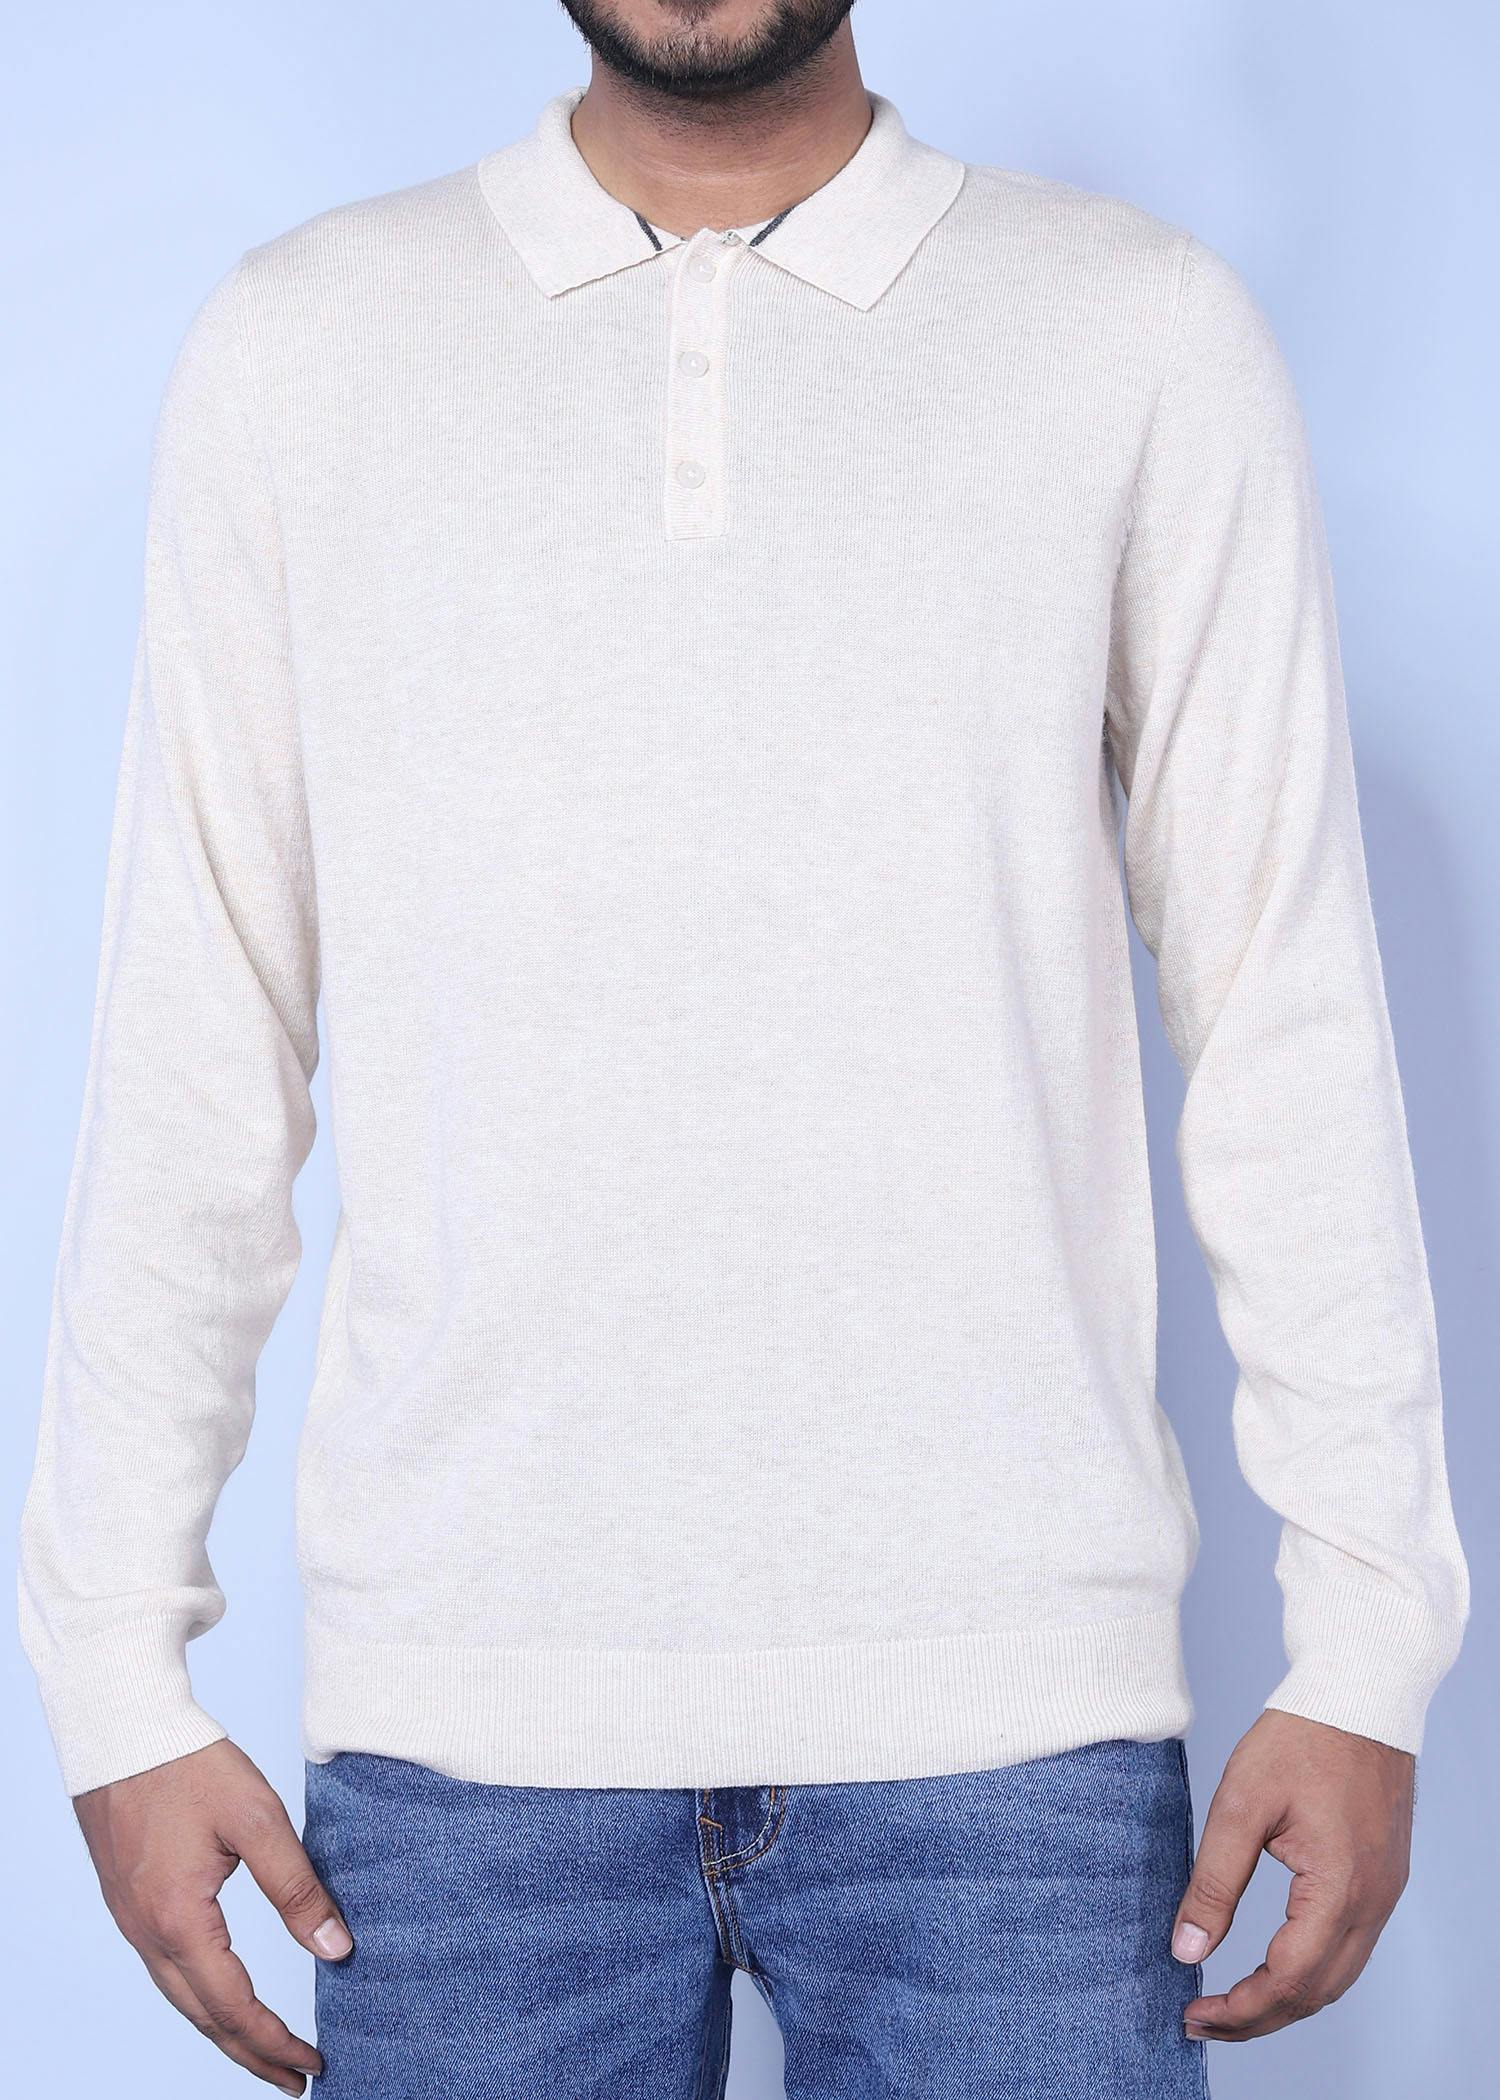 athens sweater ivory color half front view